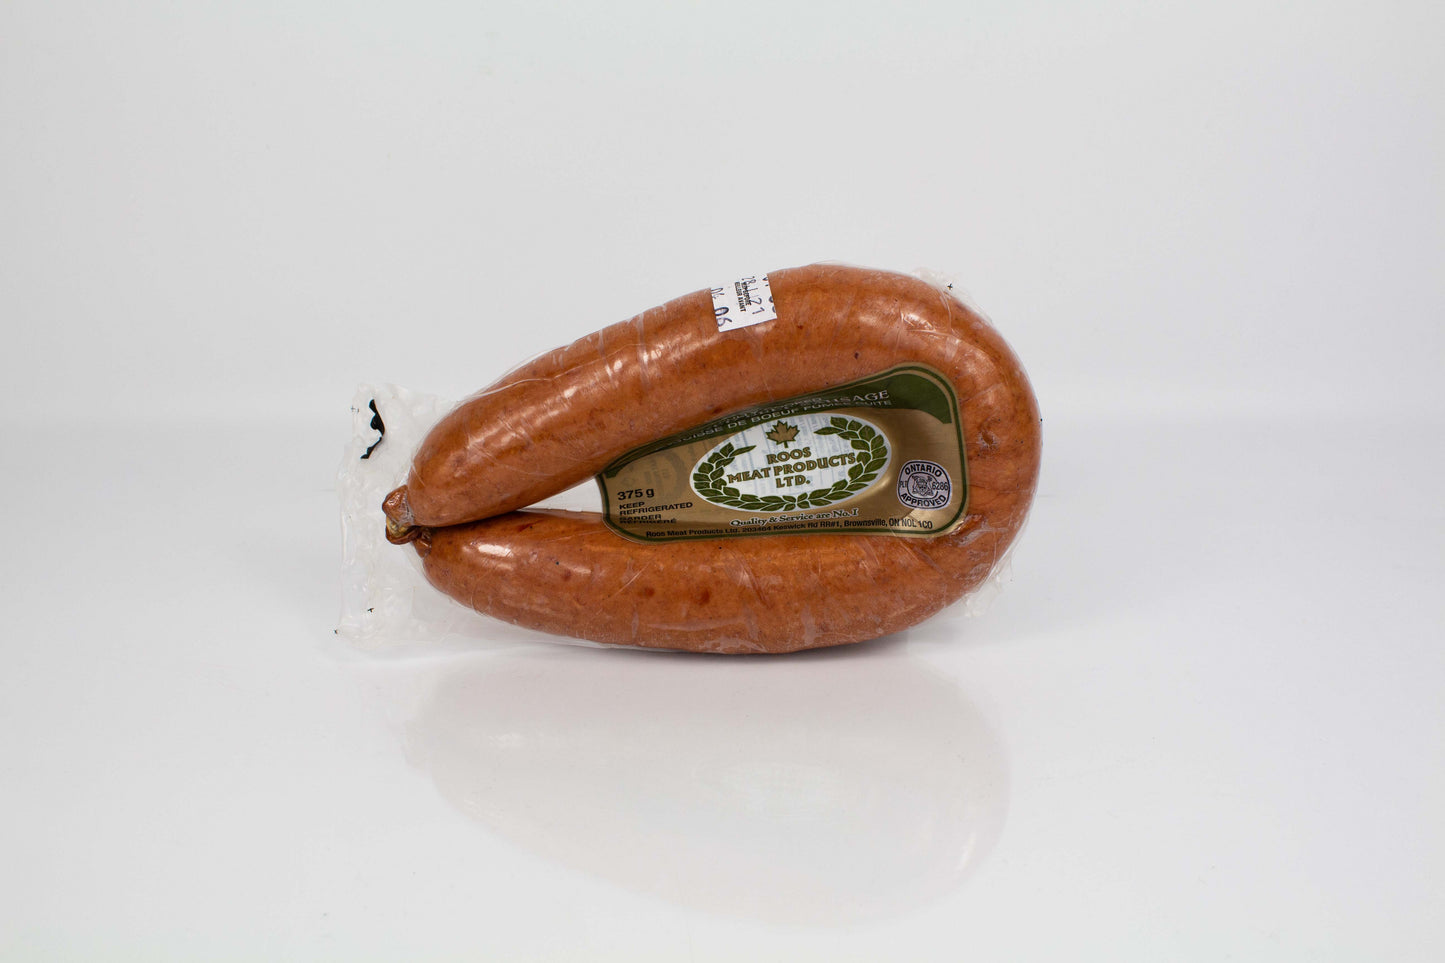 Roos Meat Products Smoked Pork And Beef Sausage (Rookworst)